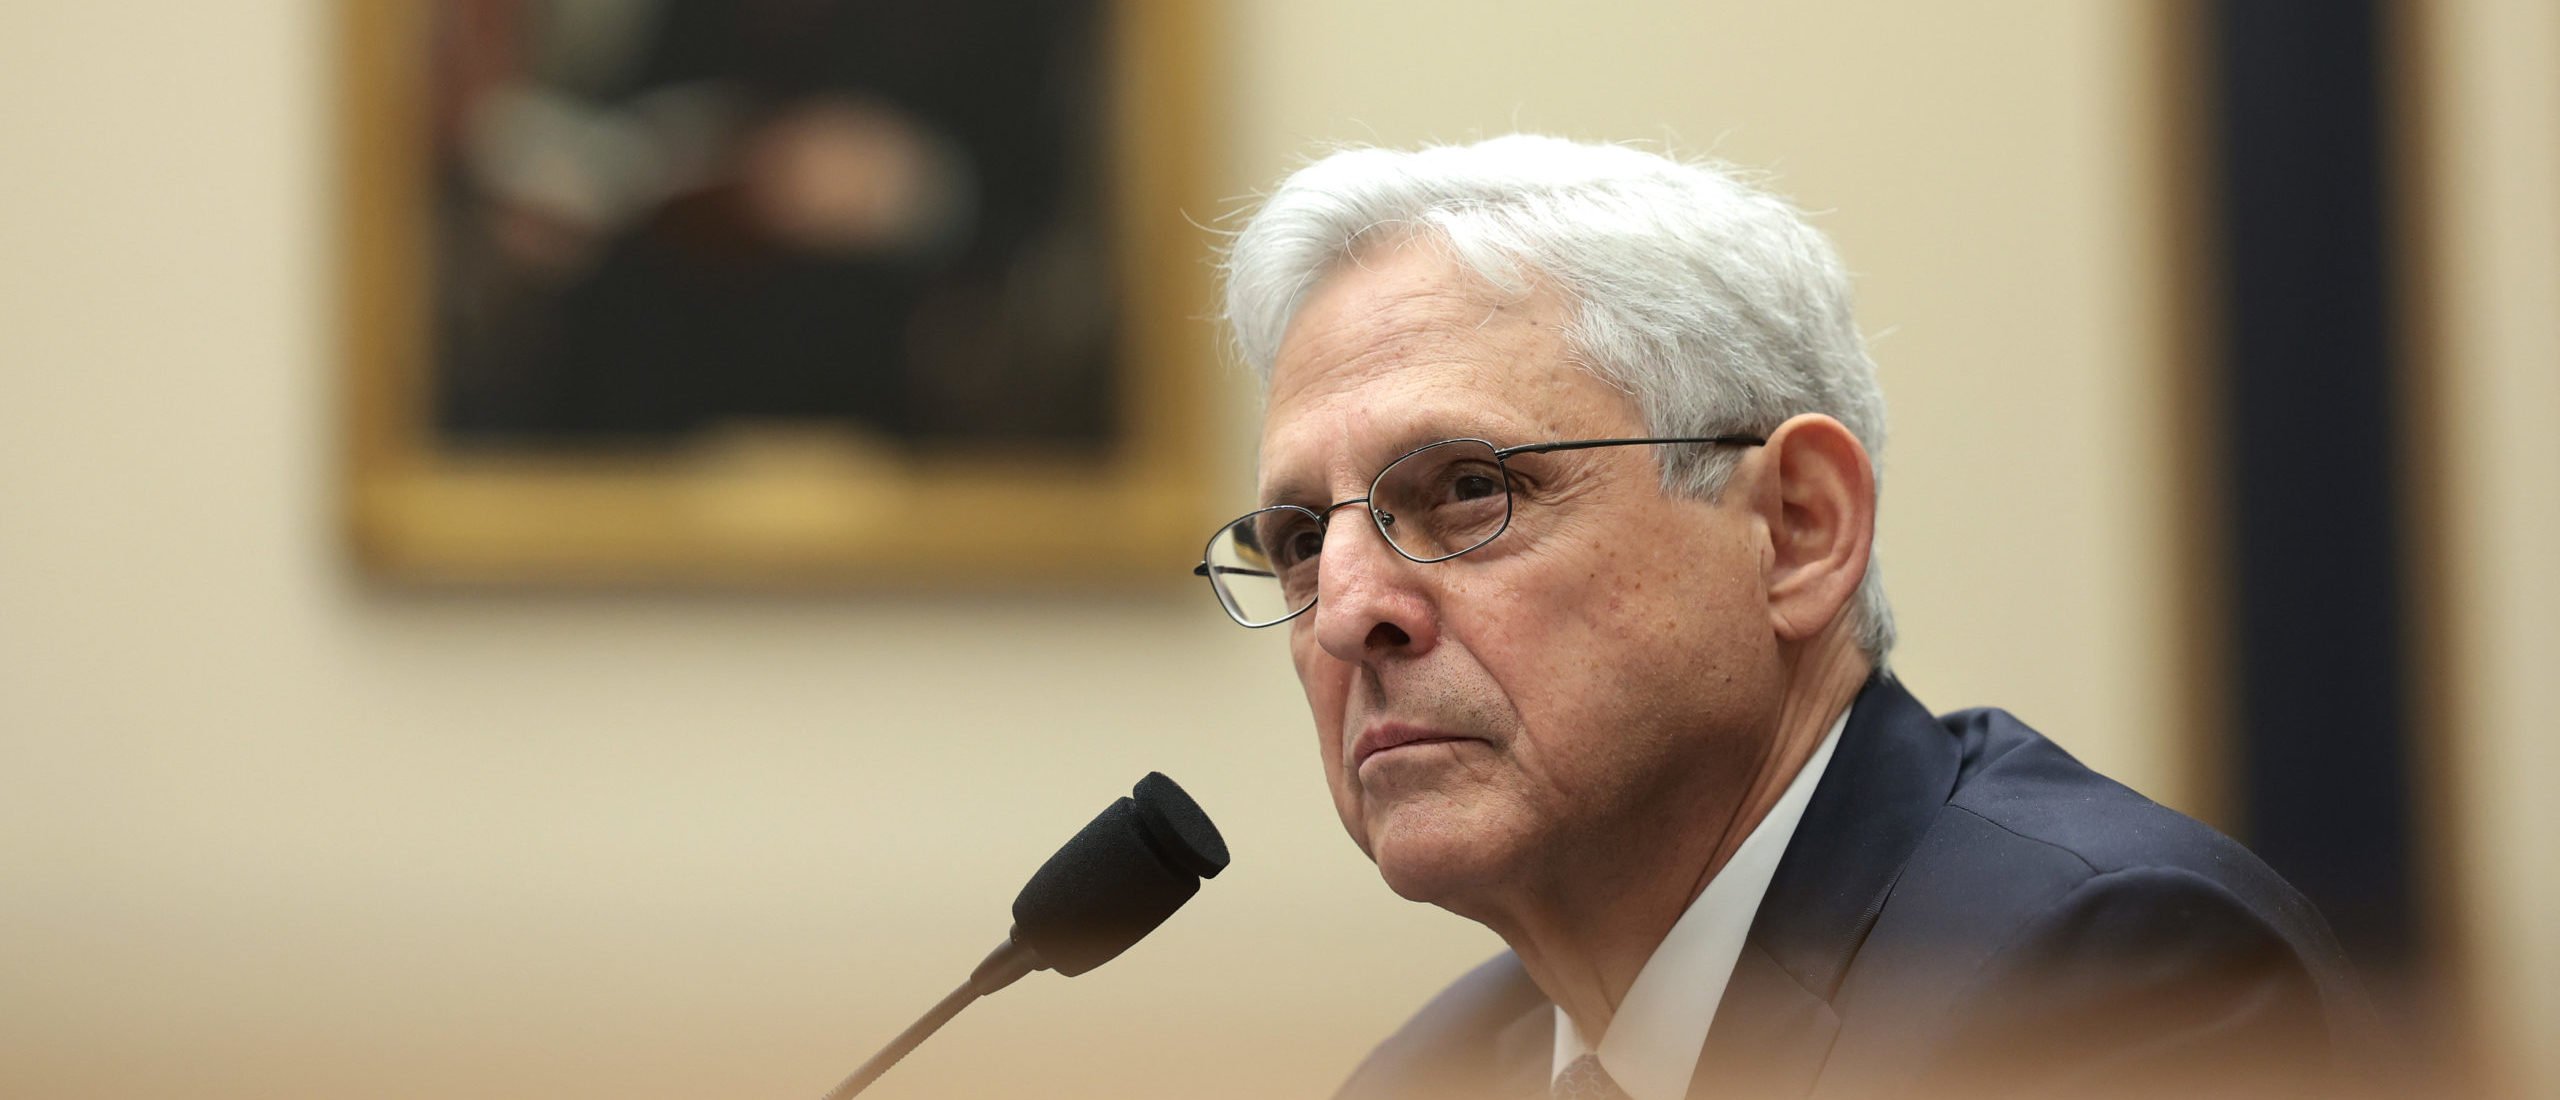 WASHINGTON, DC - SEPTEMBER 20: U.S. Attorney General Merrick Garland testifies before the House Judiciary Committee in the Rayburn House Office Building on September 20, 2023 in Washington, DC. The committee is holding an oversight hearing on the U.S. Department of Justice. (Photo by Win McNamee/Getty Images)